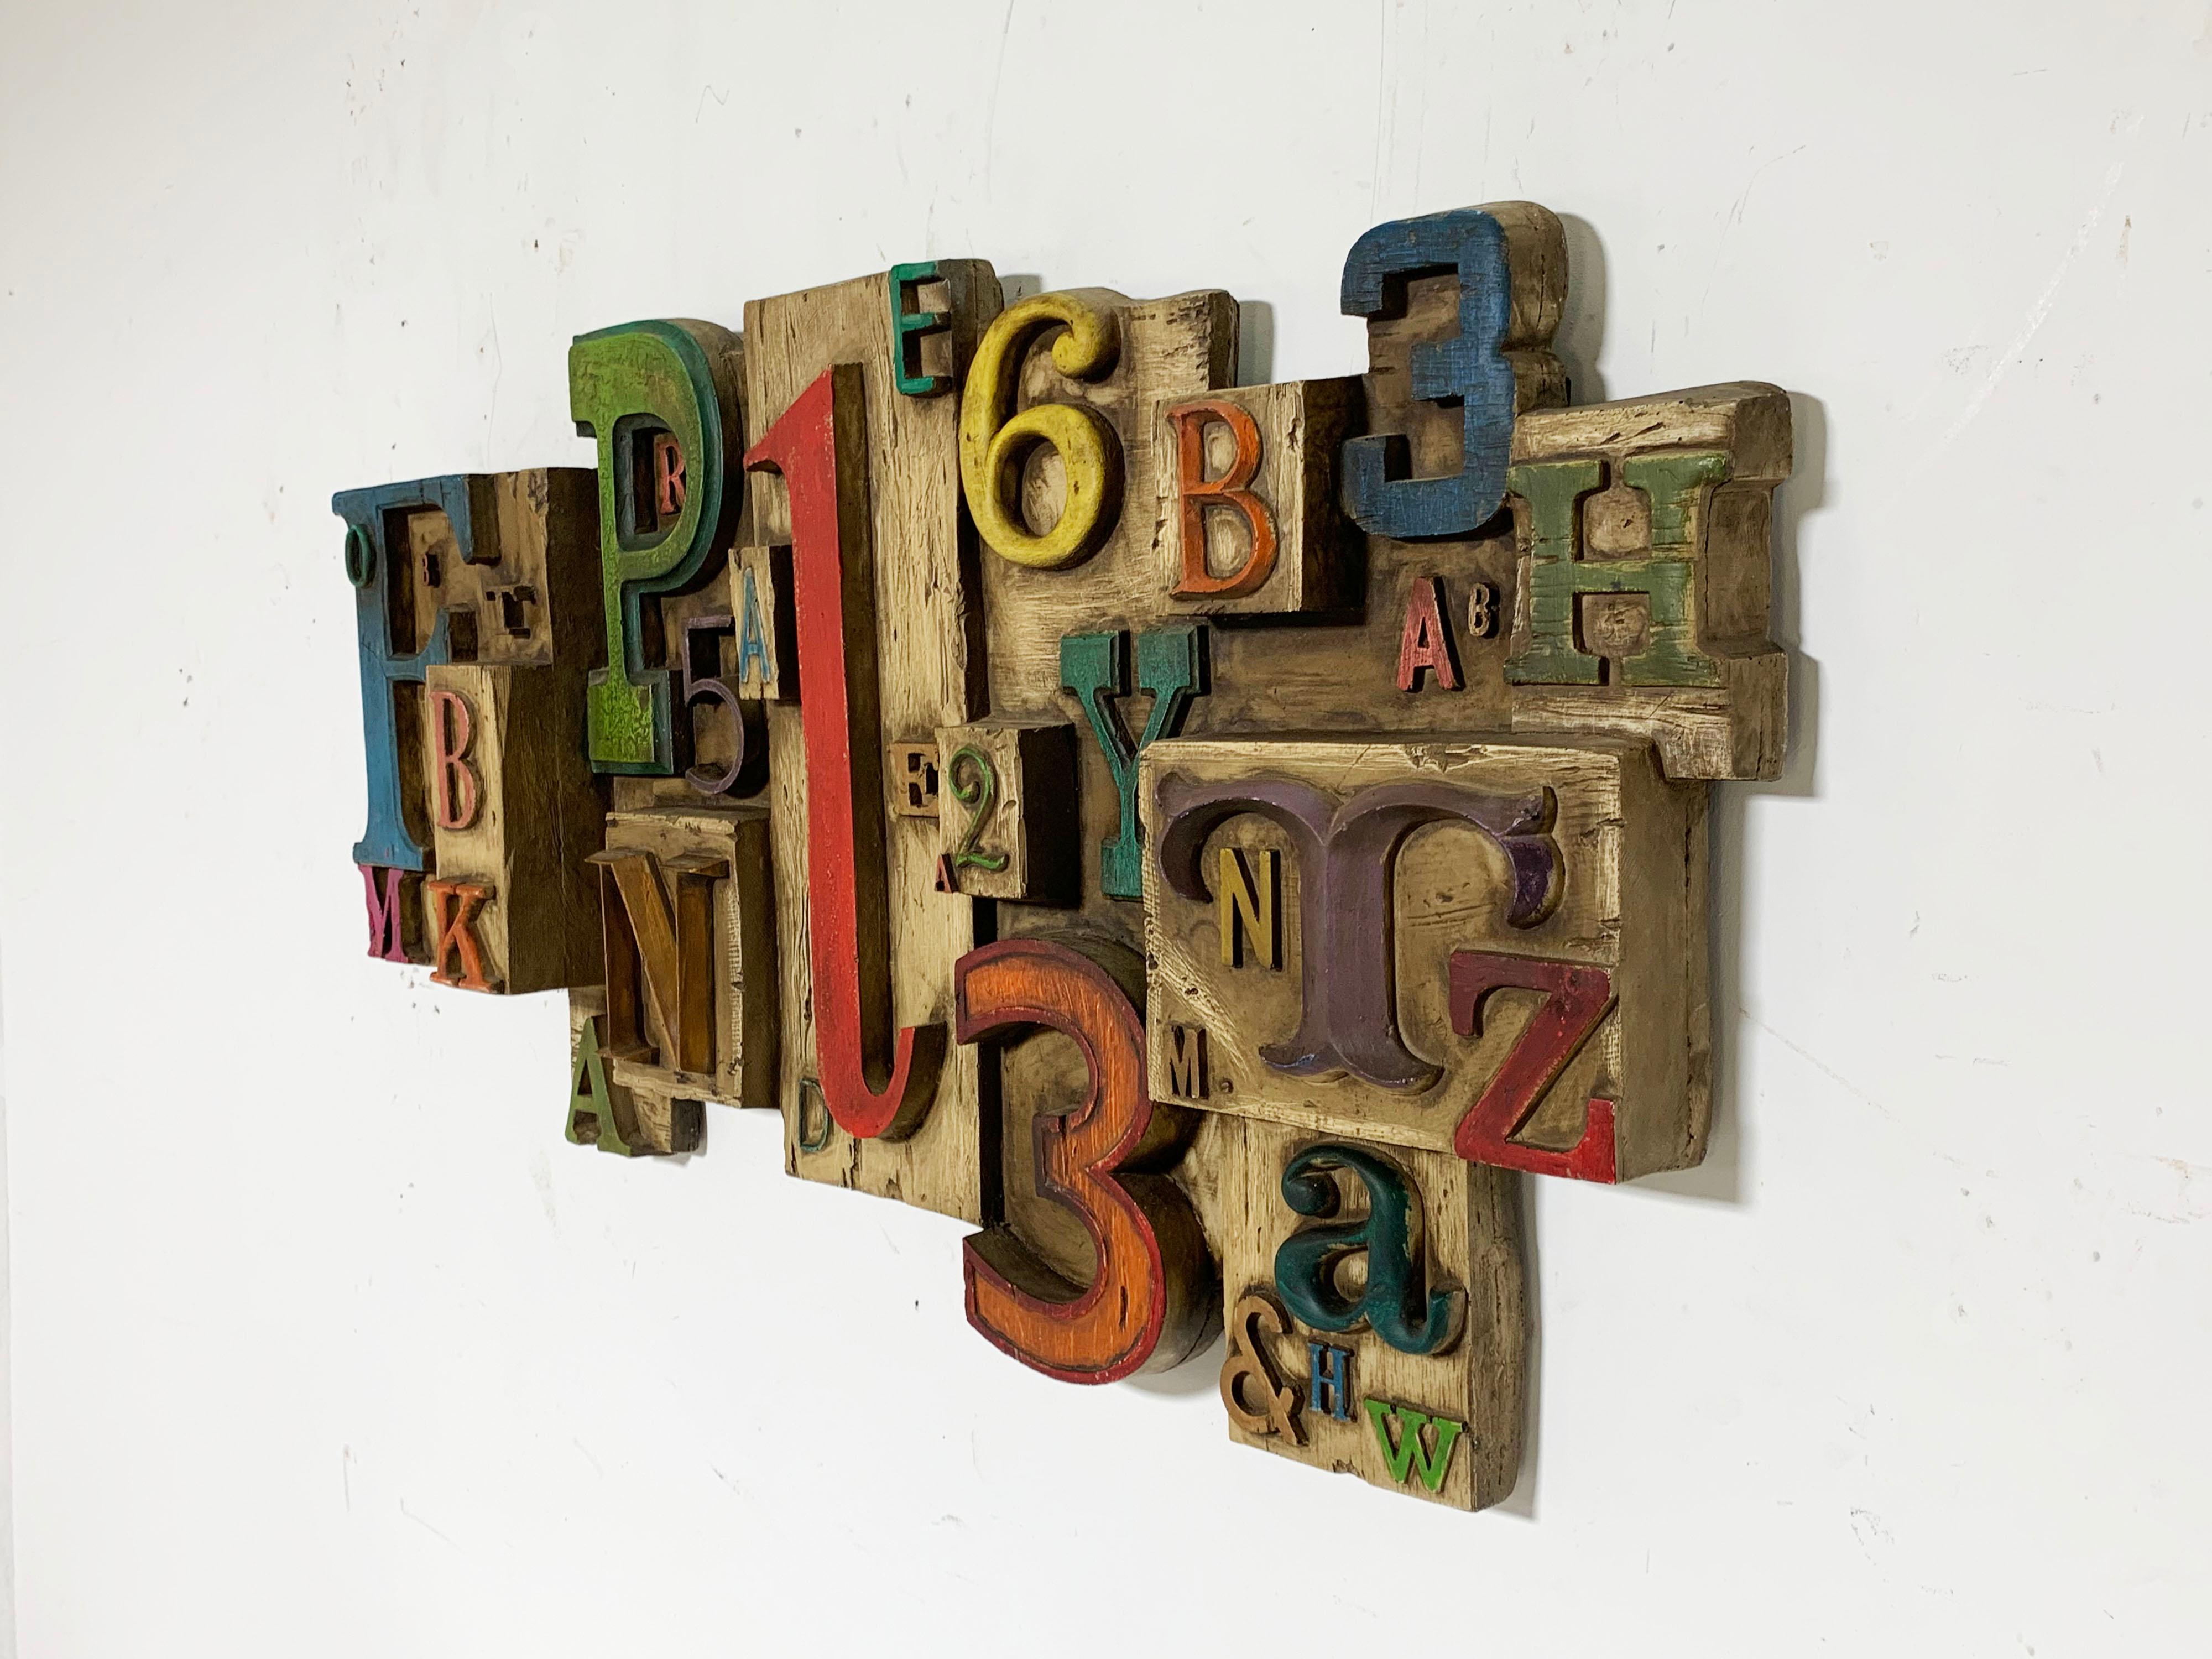 Wall sculpture by Vanguard Studios, dated 1969, composing letters and numbers in a vareity of fonts and sizes, assembled in a multi-dimensional arrangement.